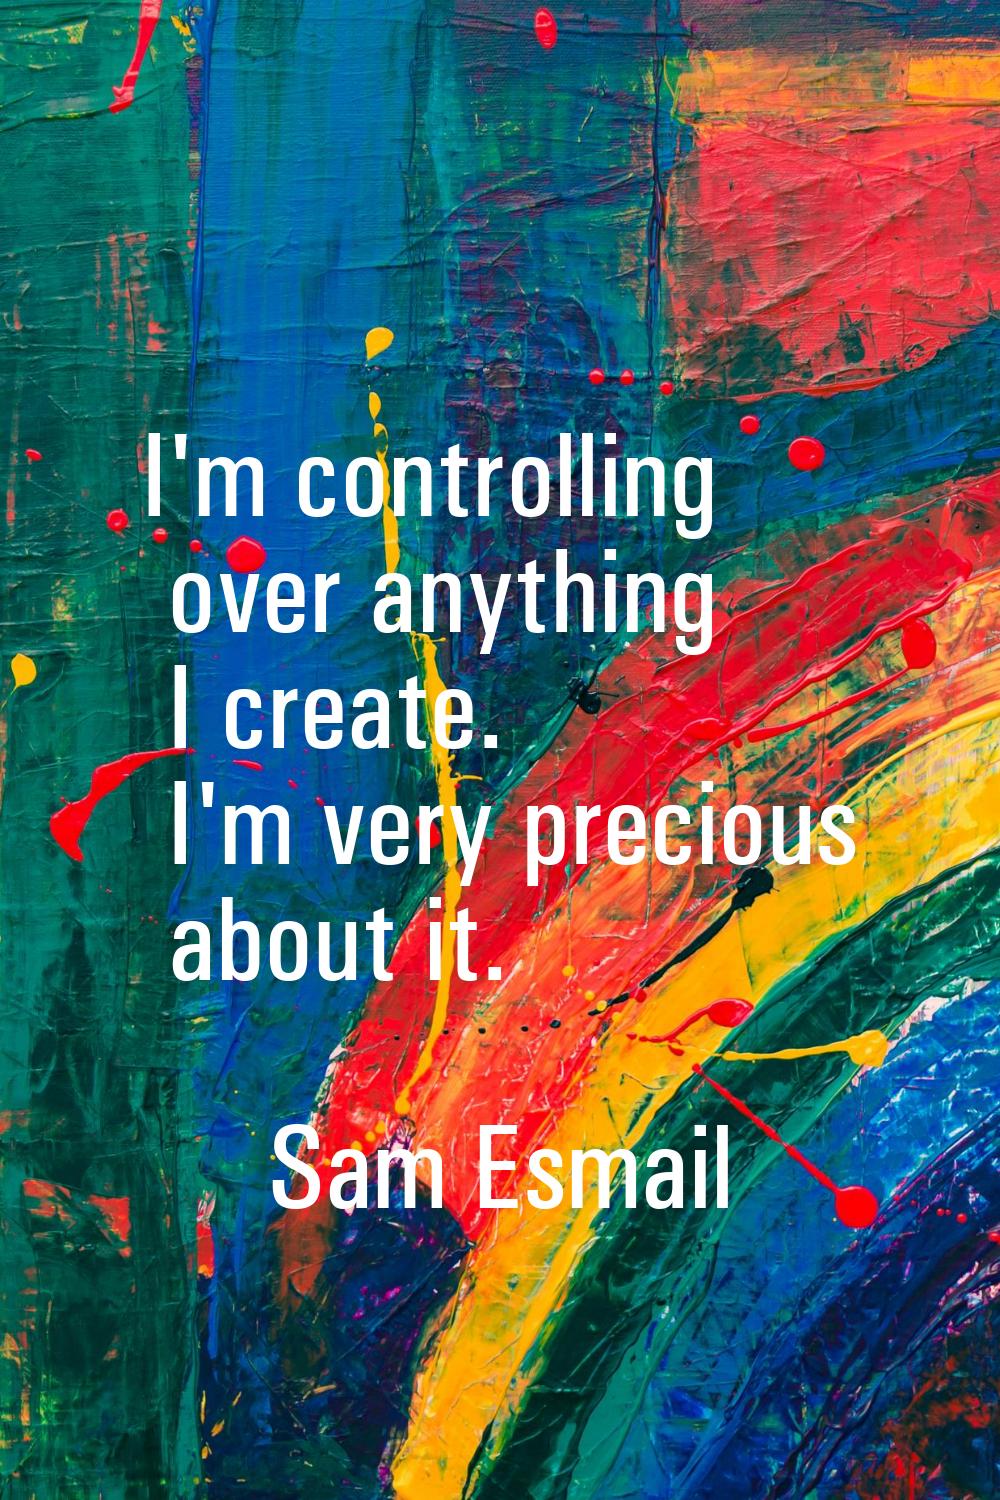 I'm controlling over anything I create. I'm very precious about it.